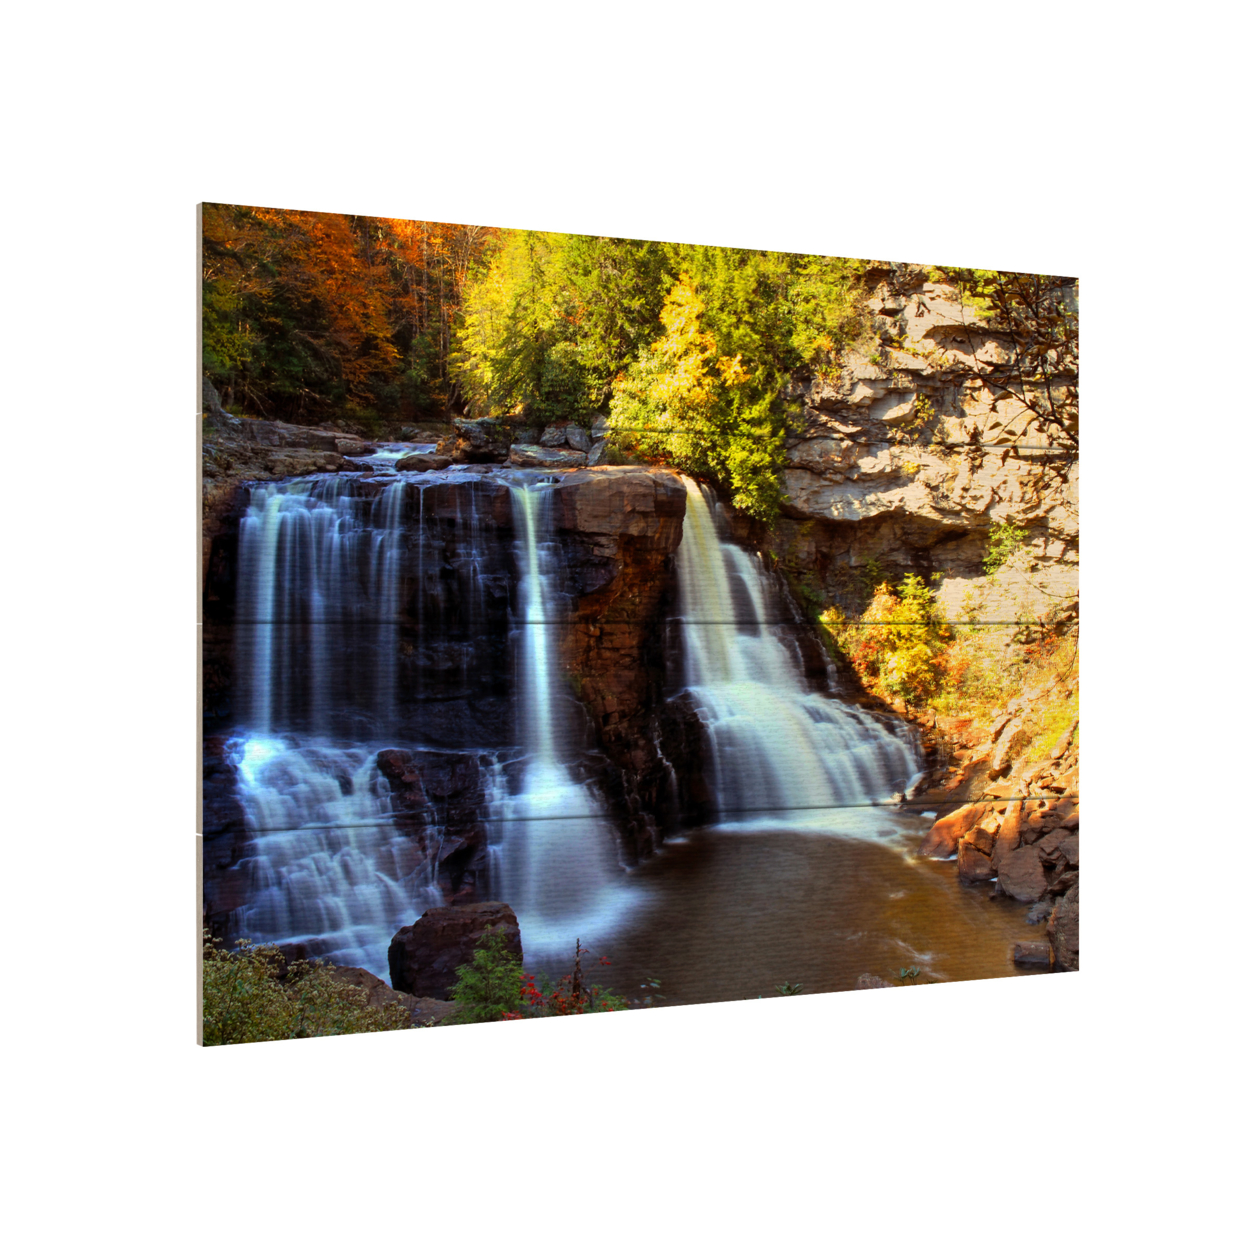 Wall Art 12 X 16 Inches Titled Motion Ready To Hang Printed On Wooden Planks